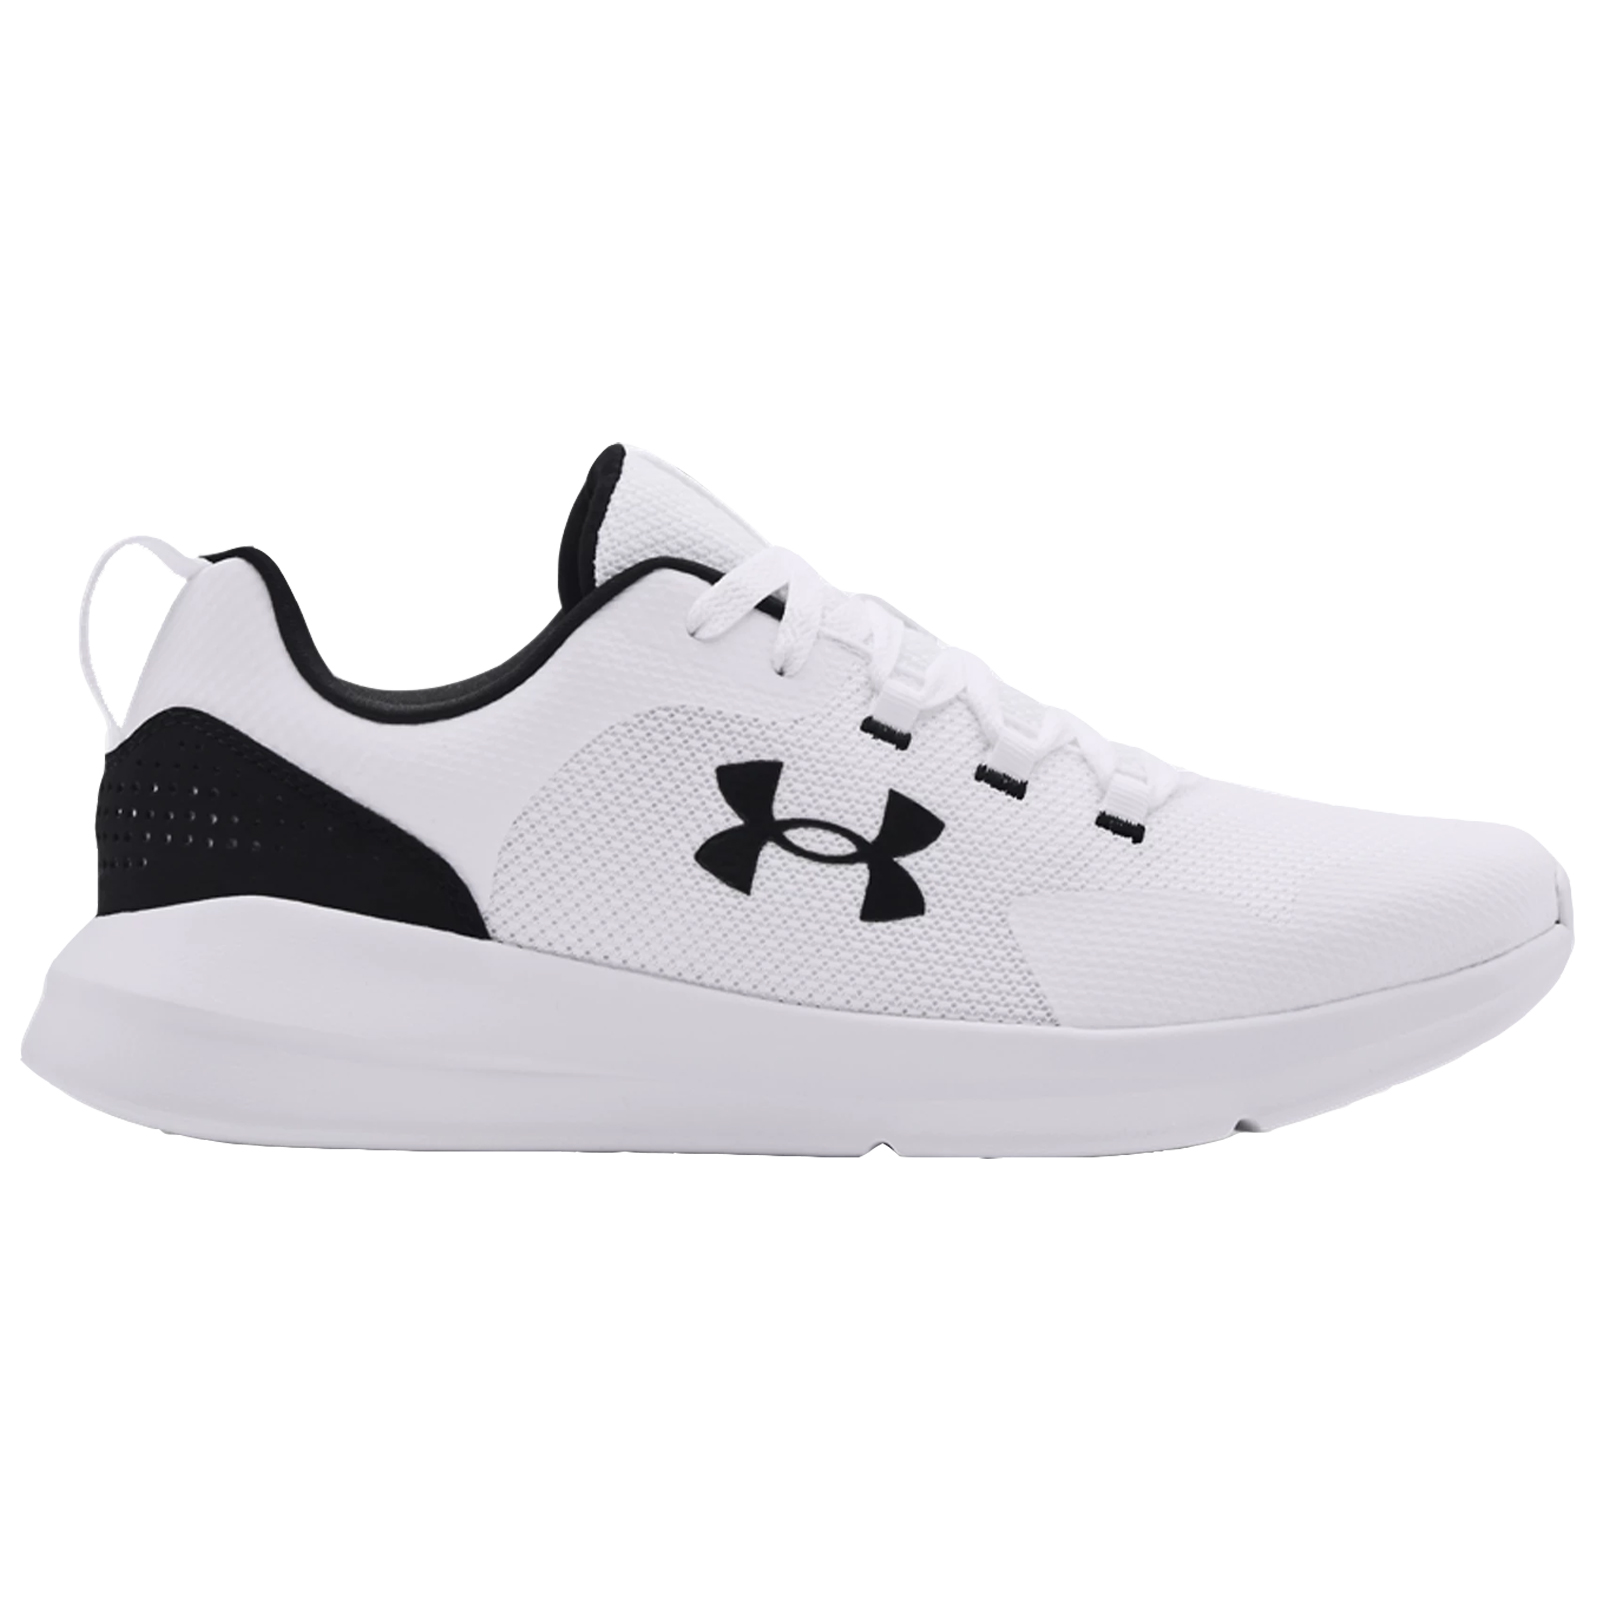 Under Armour Mens Essential Sportstyle Trainers UA Running